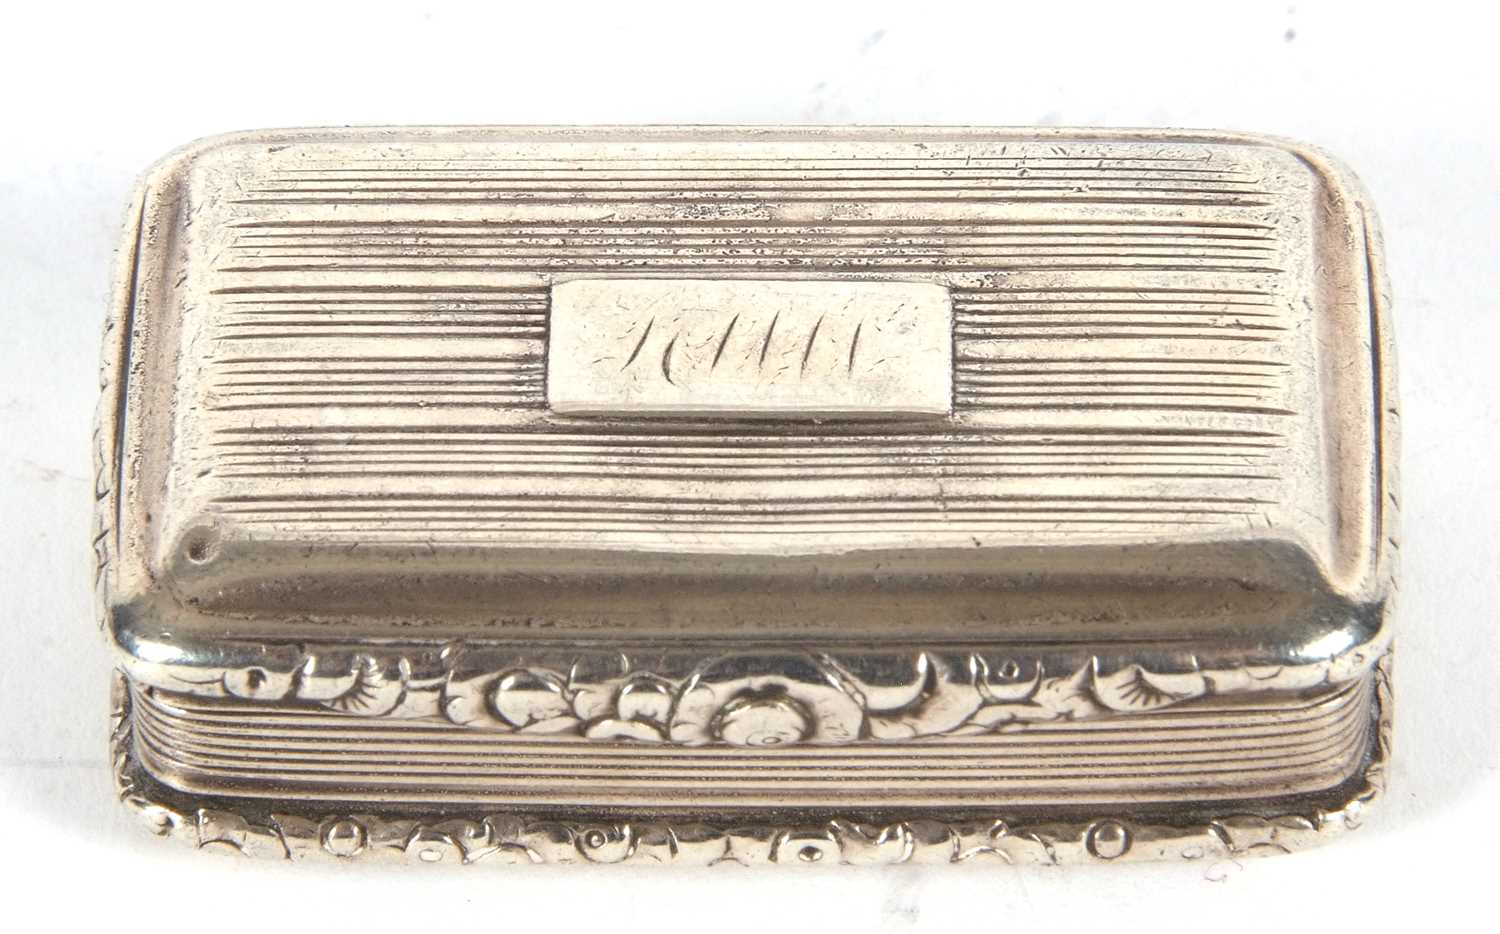 A George IV silver snuff box of rectangular form having cast foliate edges and thumb piece, engraved